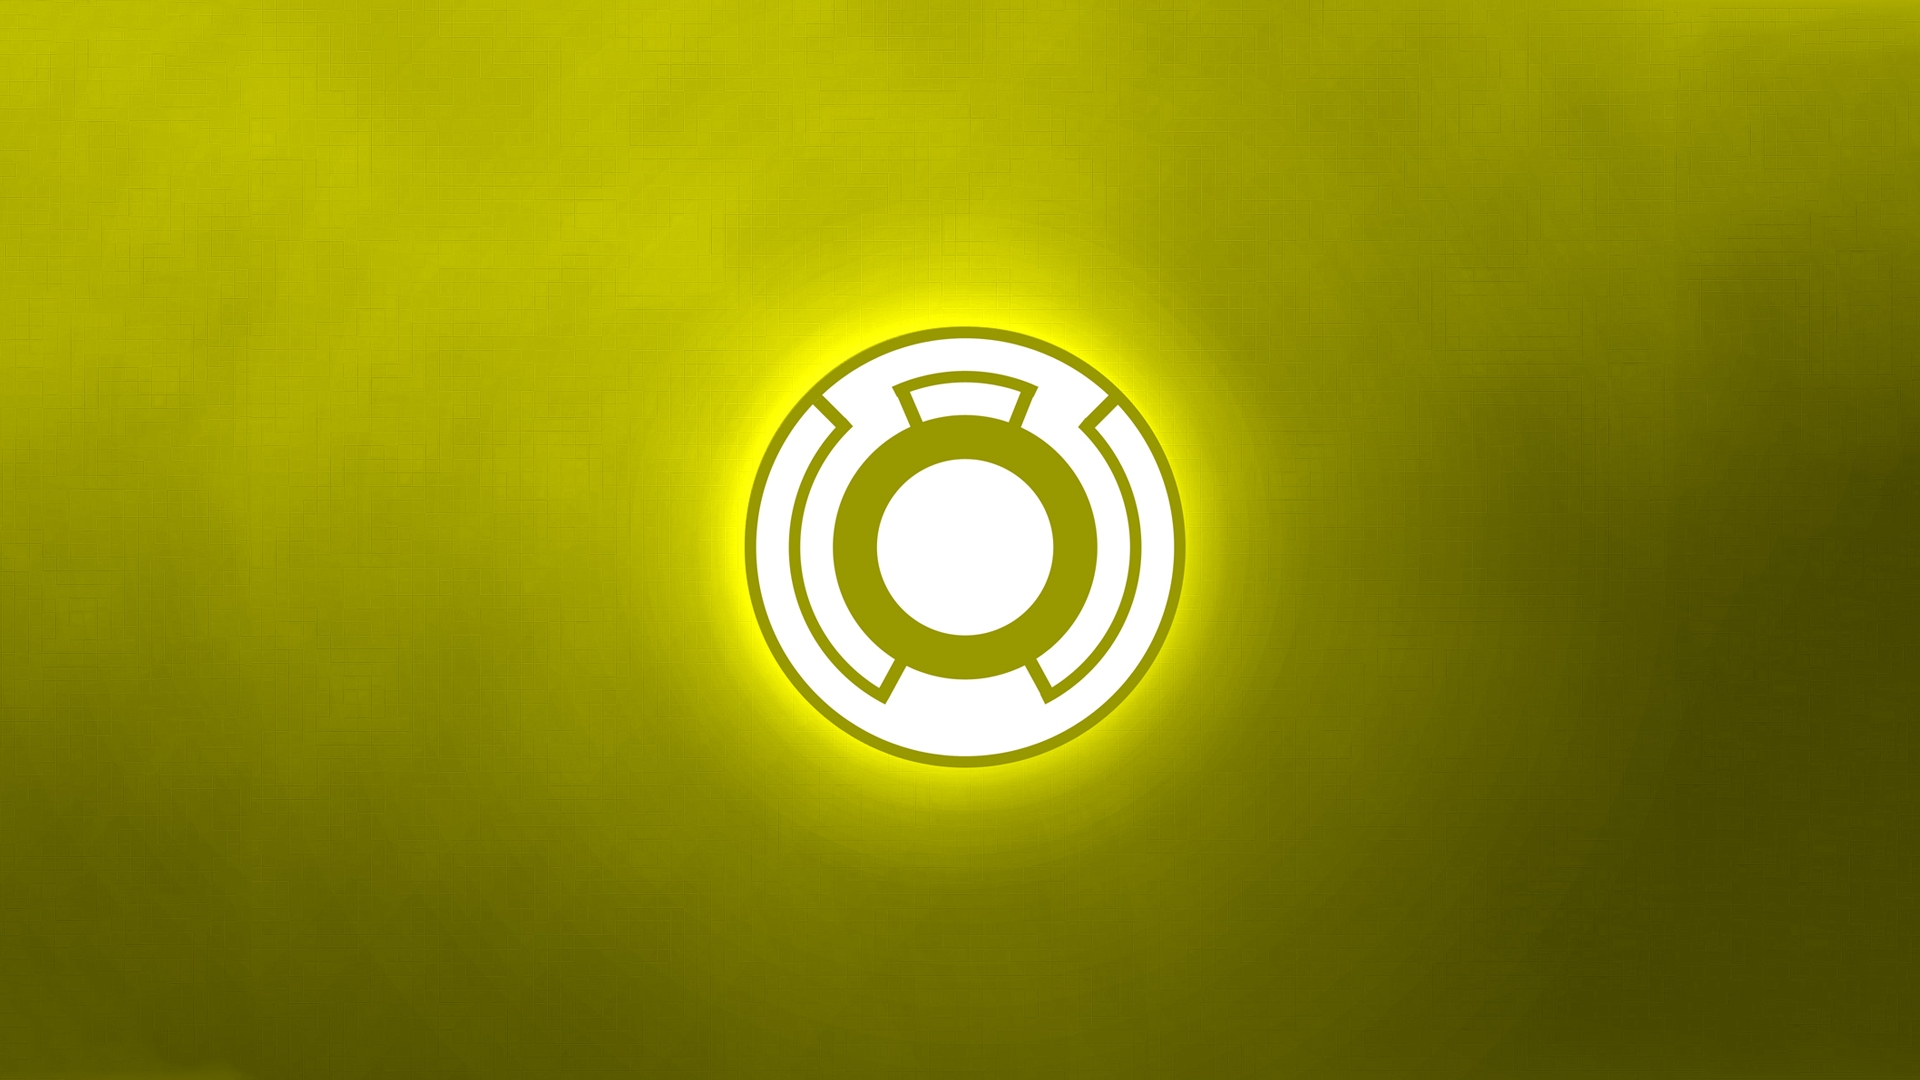 Sinestro Corps HD Wallpaper Background Image 1920x1080